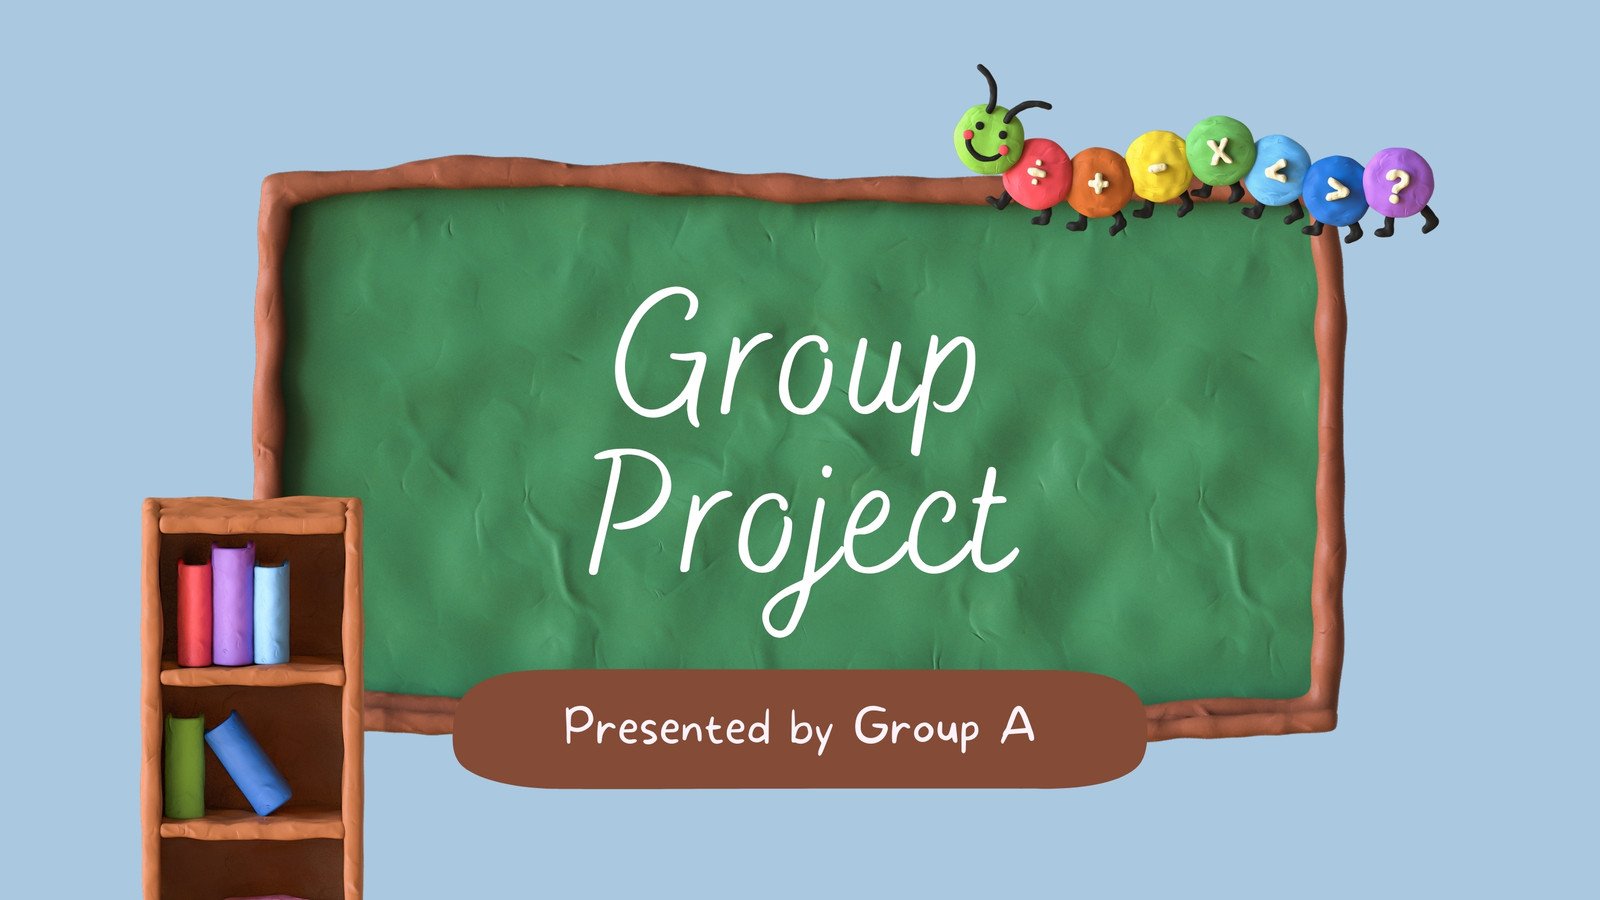 cute school backgrounds for powerpoint